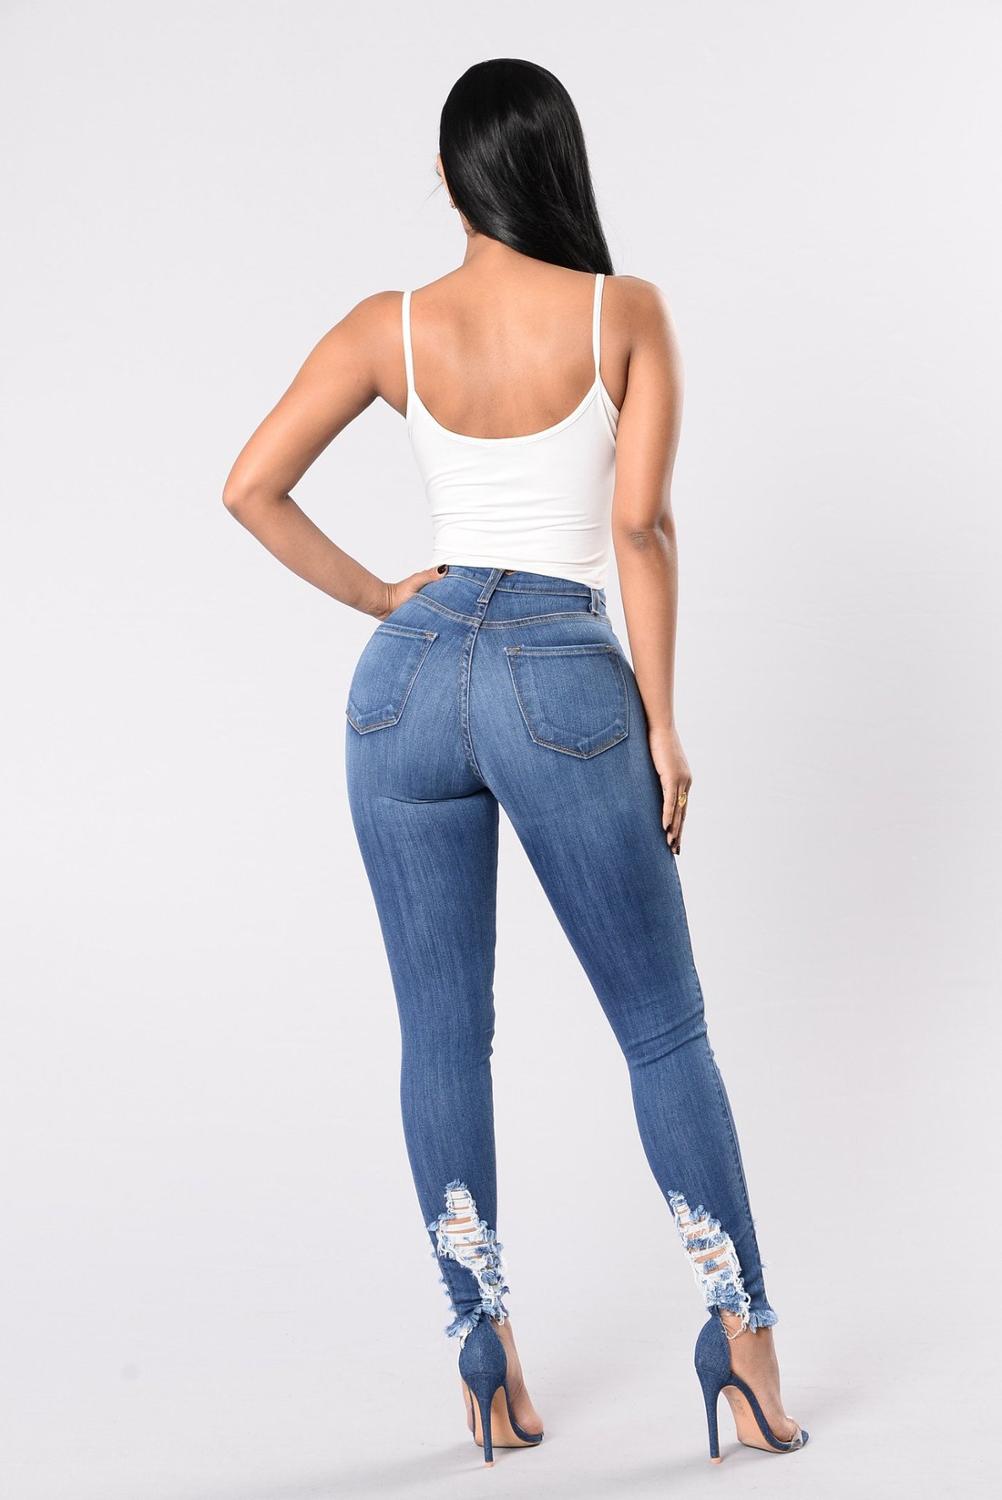 Hot sale woman ripped jeans fashion trendy high waist jeans casual skinny slim denim pencil pants S-3XL Top quality new arrival